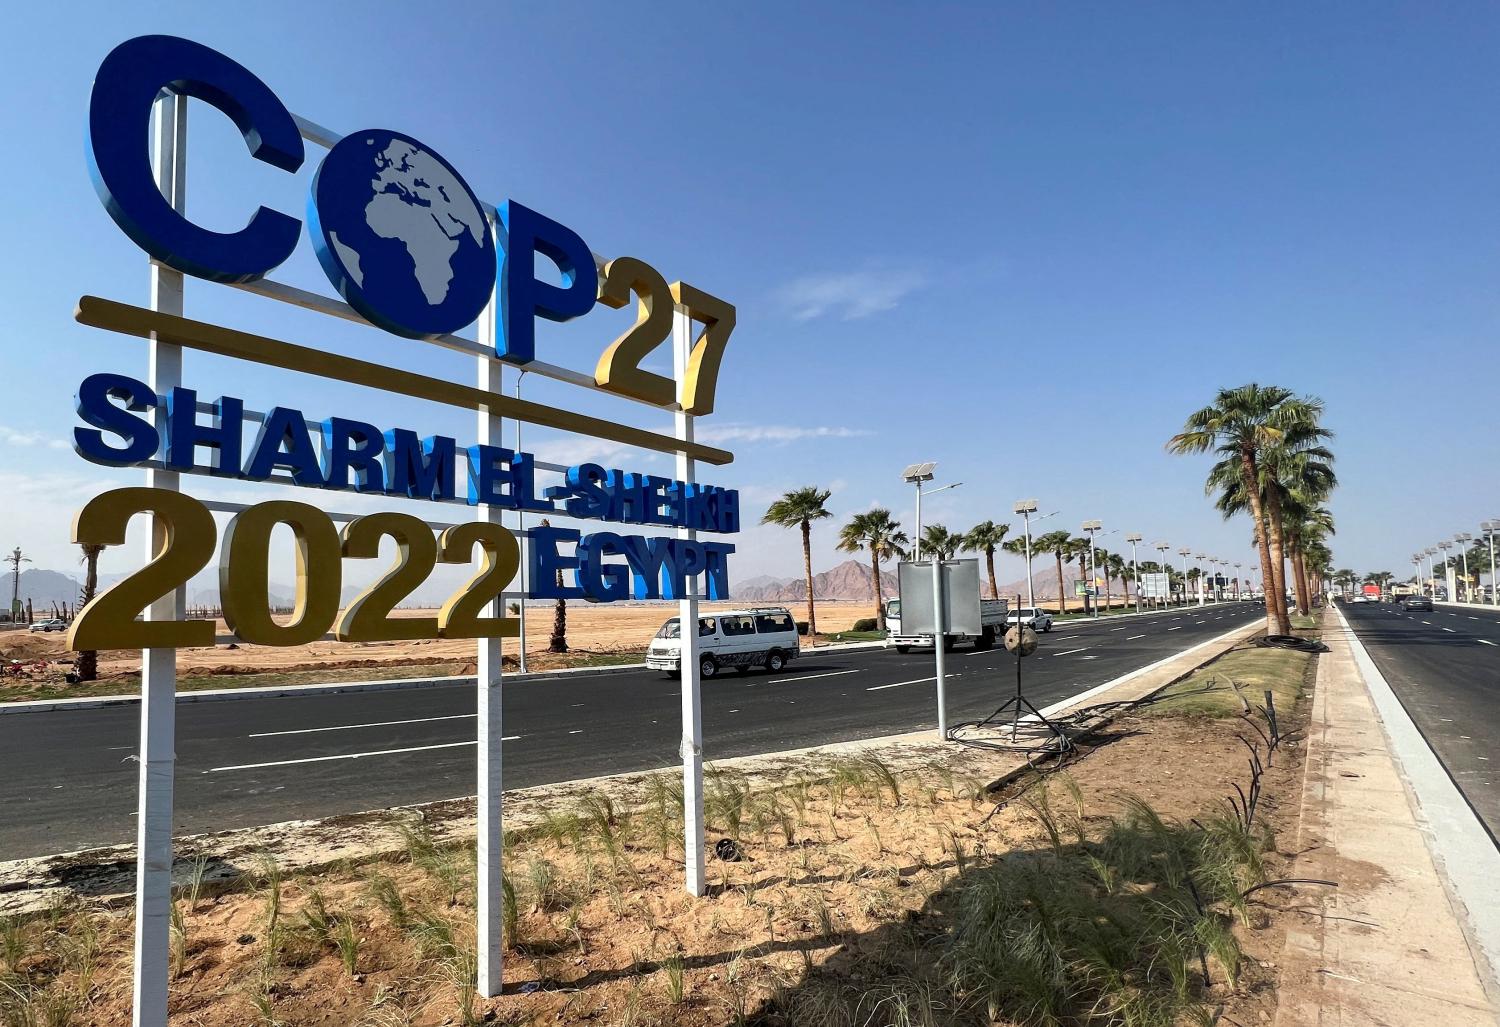 FILE PHOTO: View of a COP27 sign on the road leading to the conference area in Egypt's Red Sea resort of Sharm el-Sheikh town as the city prepares to host the COP27 summit next month, in Sharm el-Sheikh, Egypt October 20, 2022. REUTERS/Sayed Sheasha/File Photo